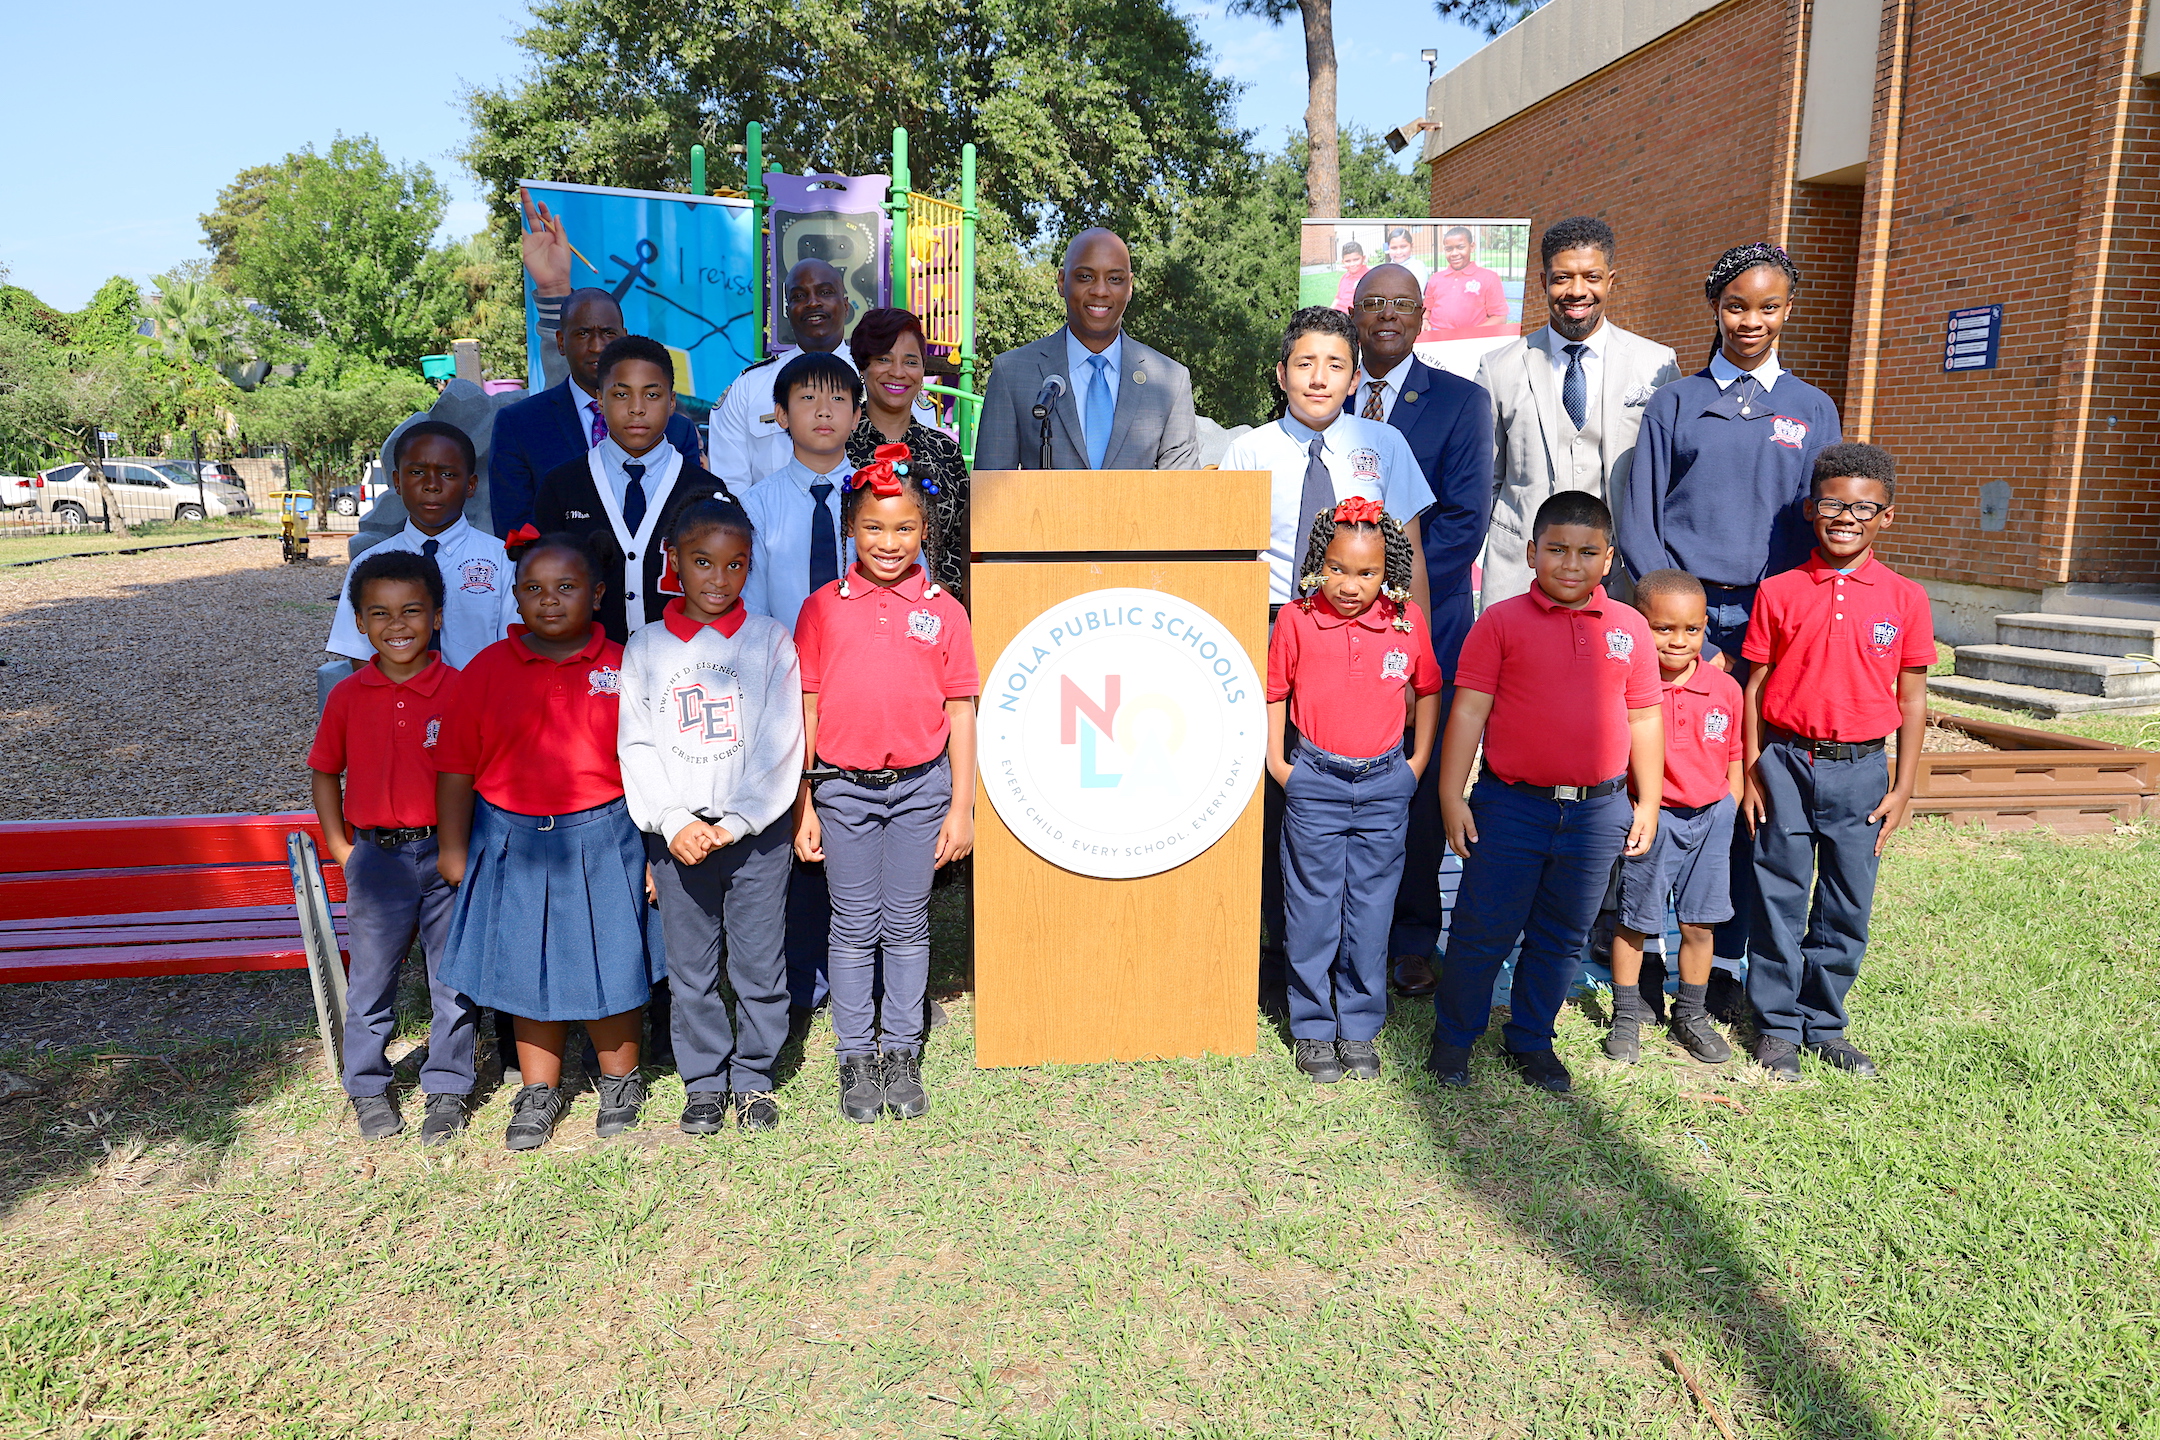 Superintendent Dr. Henderson Lewis, Jr. poses with staff and students behind a podium outside